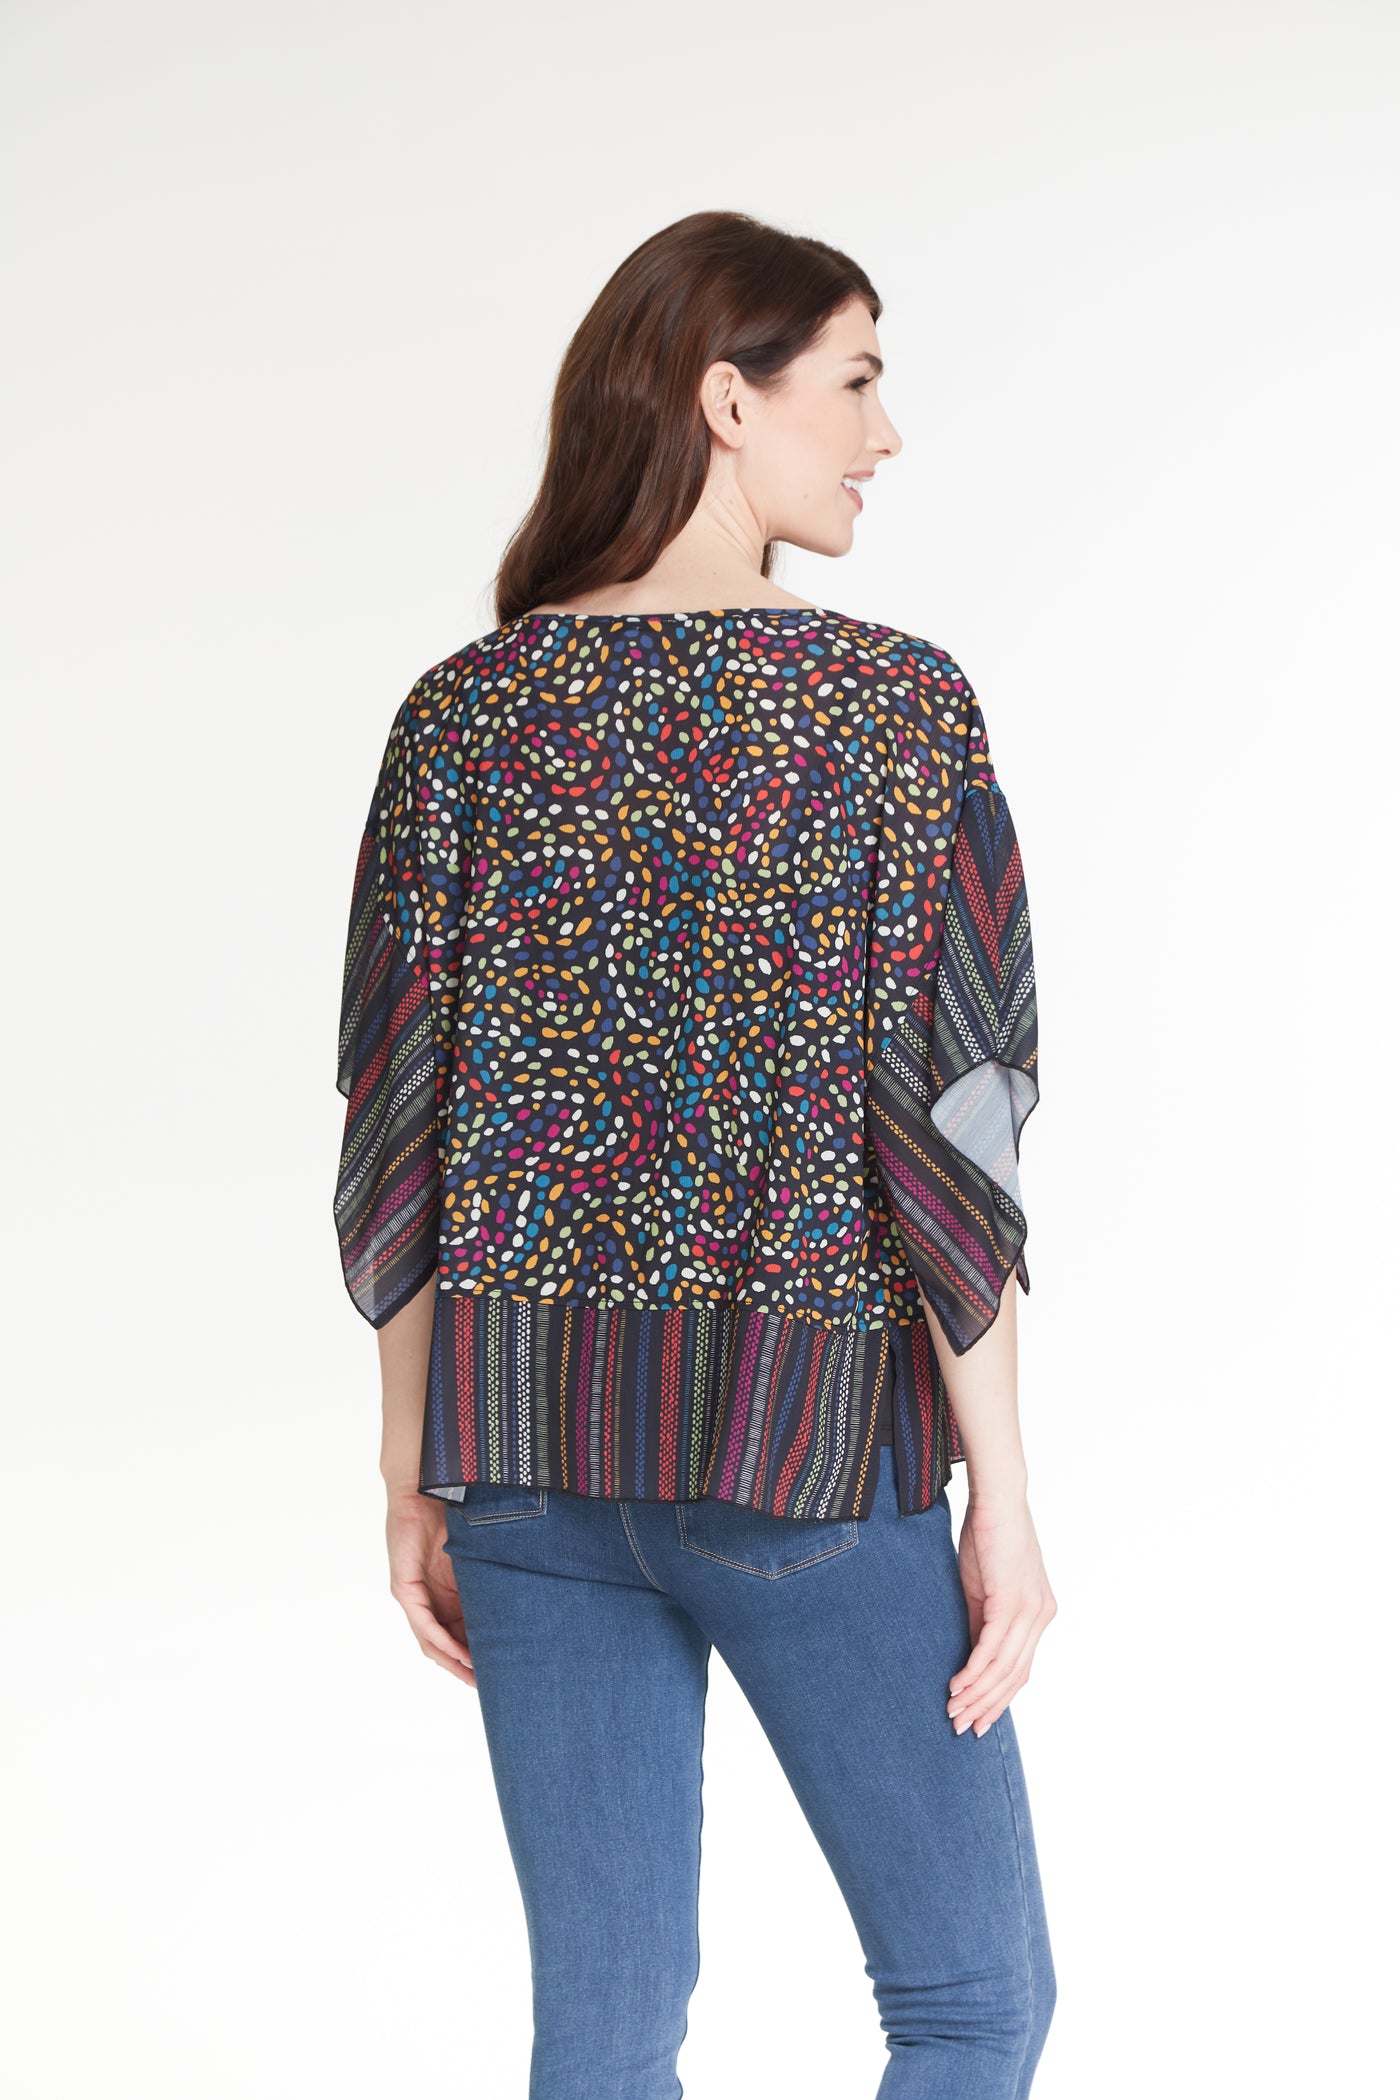 Poncho Top and Cami - Multi